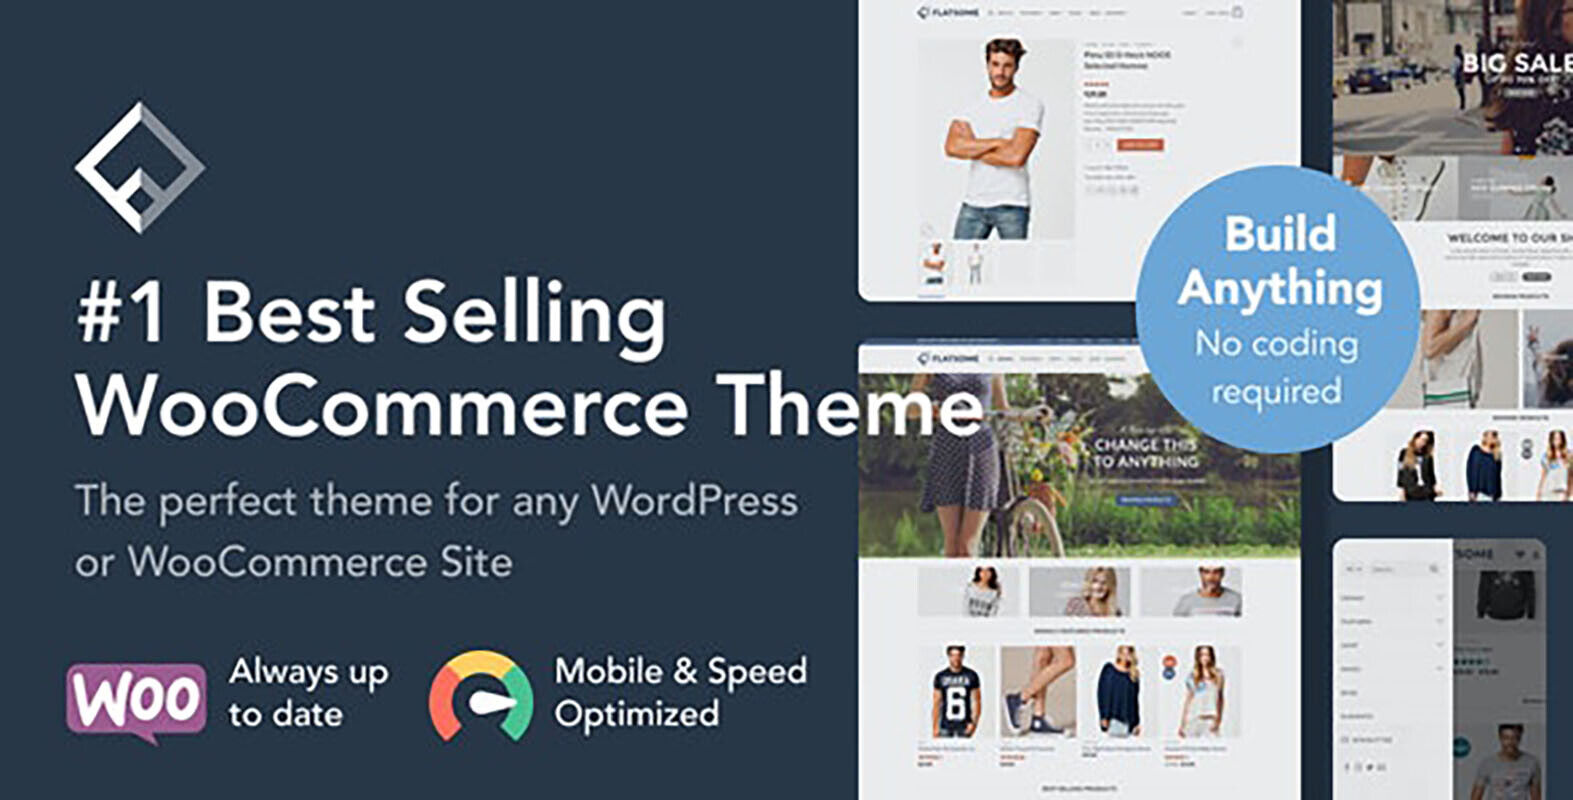 Flatsome 3.16.7 | Multi-Purpose Responsive WooCommerce Themes FREE & FAST UPDATE themeforest.net Does Not Apply